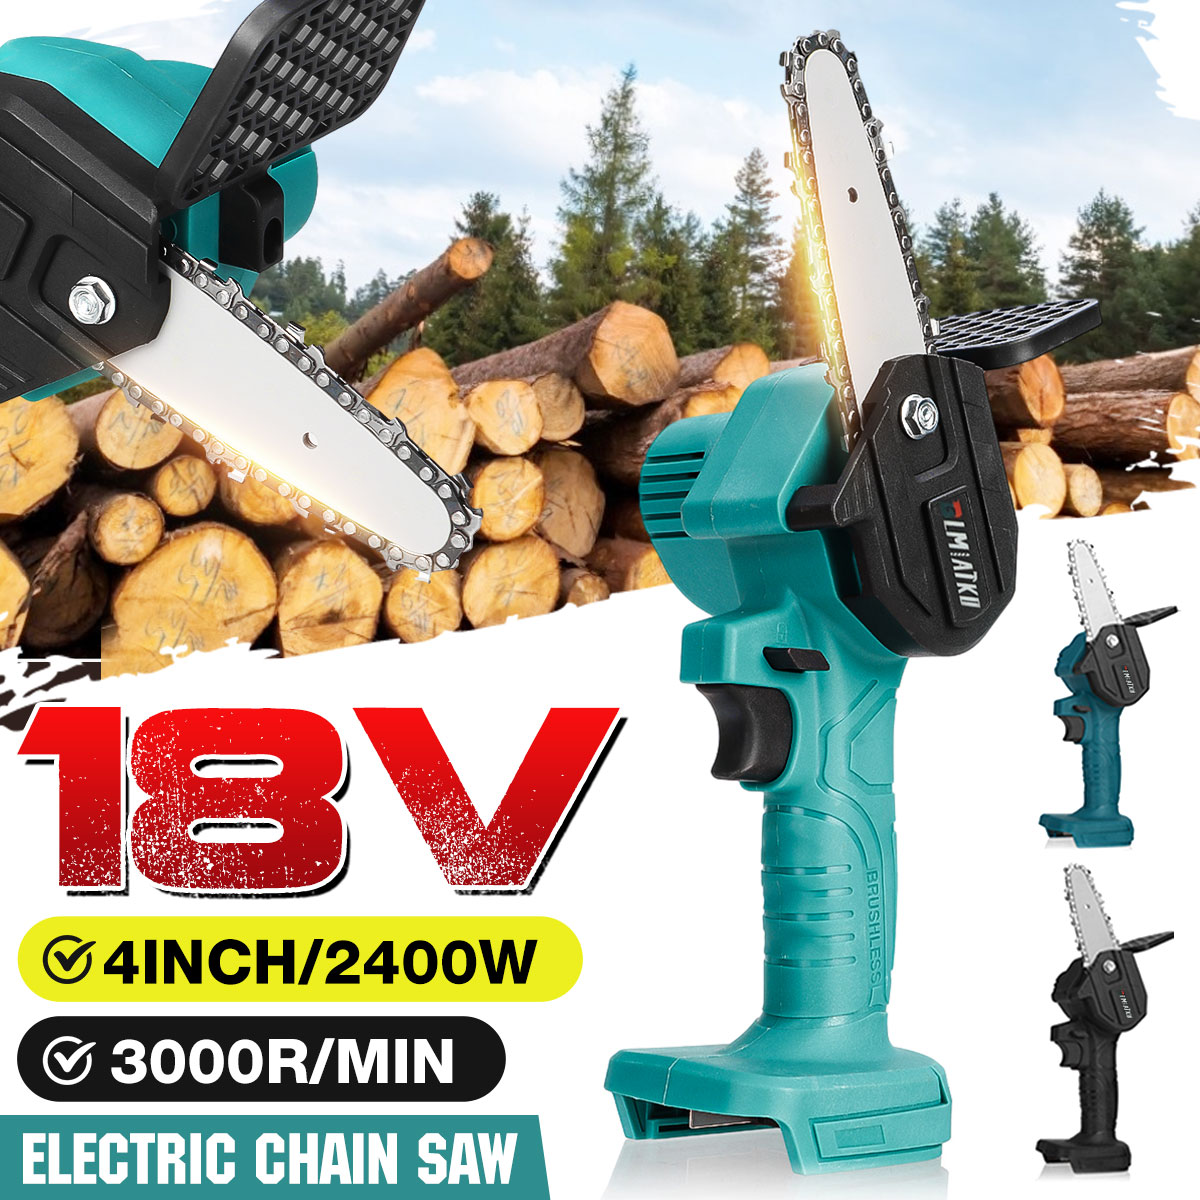 4Inch-2500W-Electric-Chain-Saw-Portable-Woodworking-Wood-Cutter-For-Makita-18V-Battery-1852917-2